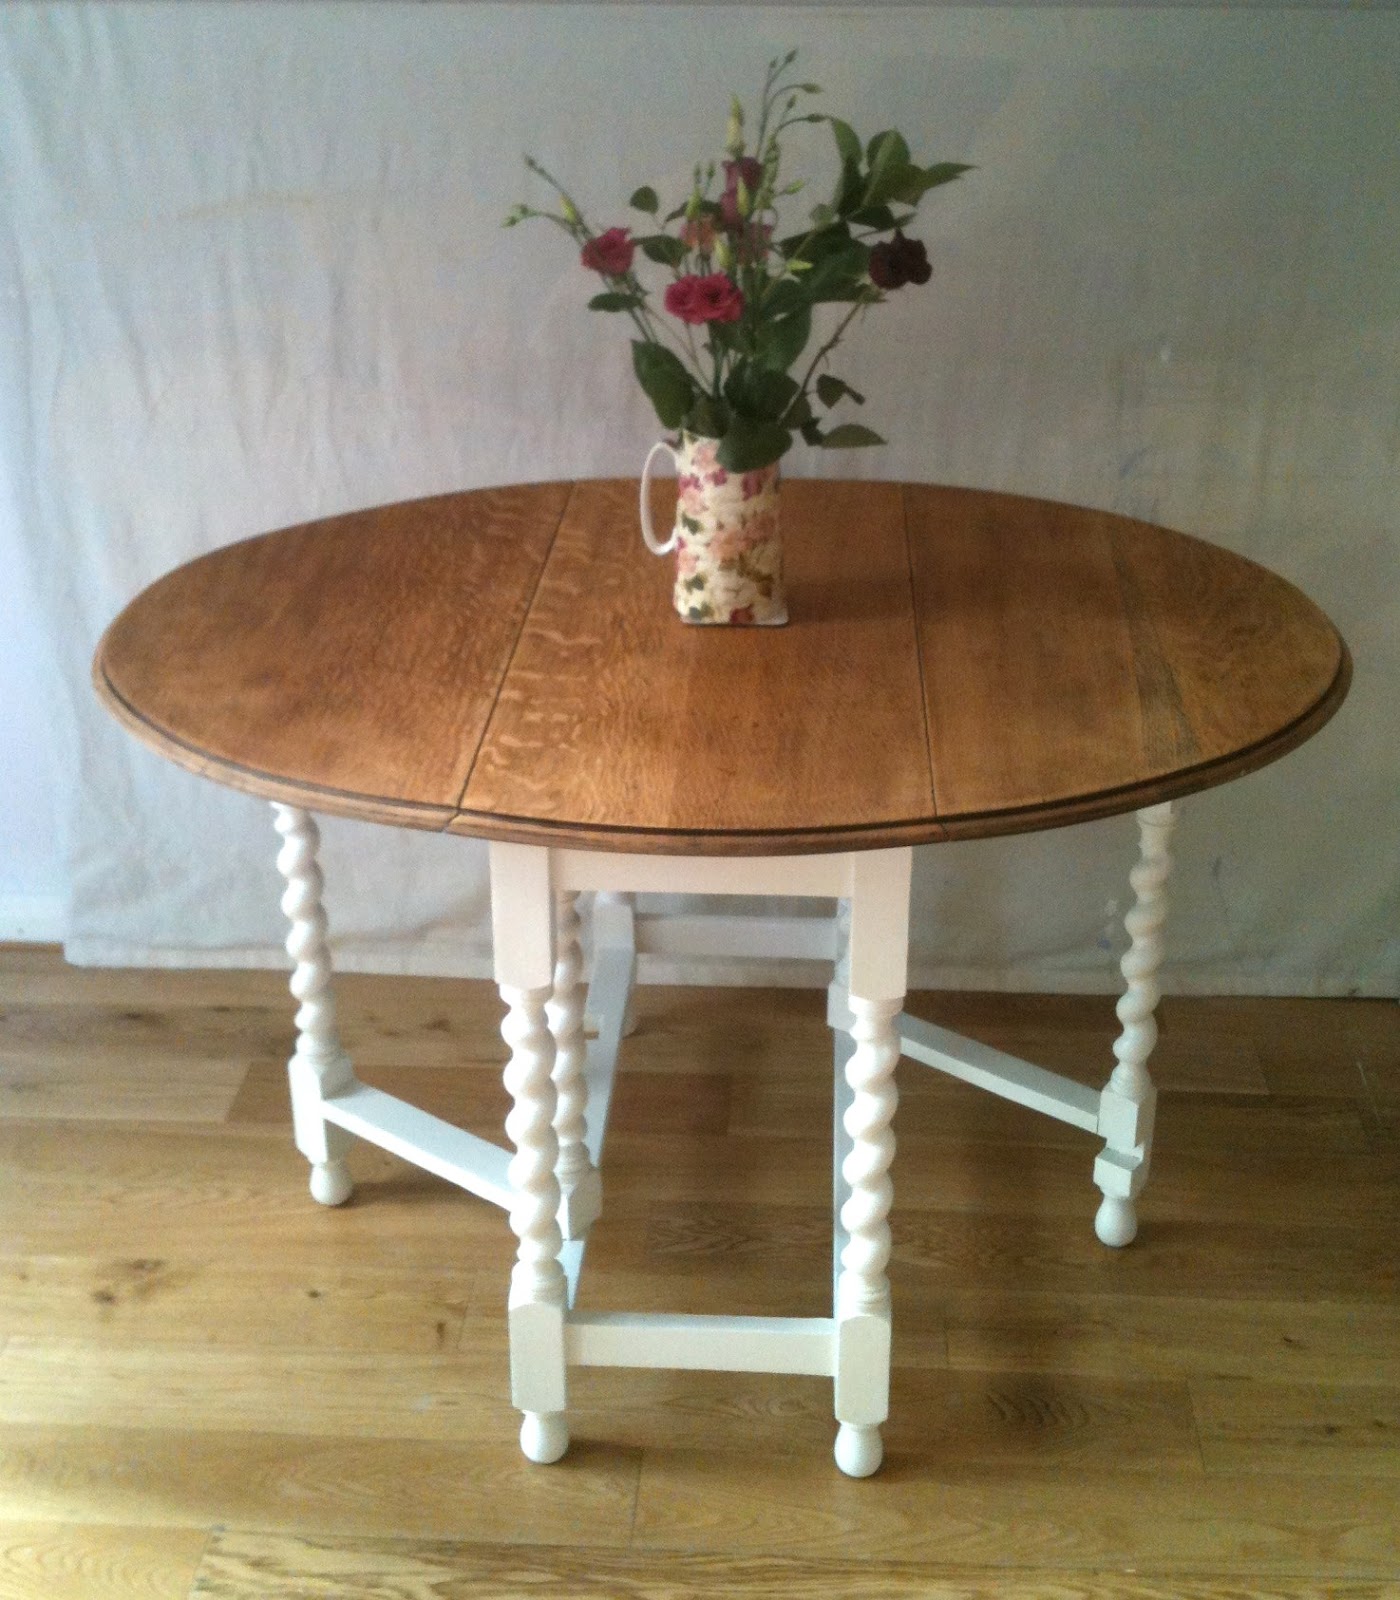 BowieBelle Vintage & Upcycled Furniture: Barley Twist Table Dining ...